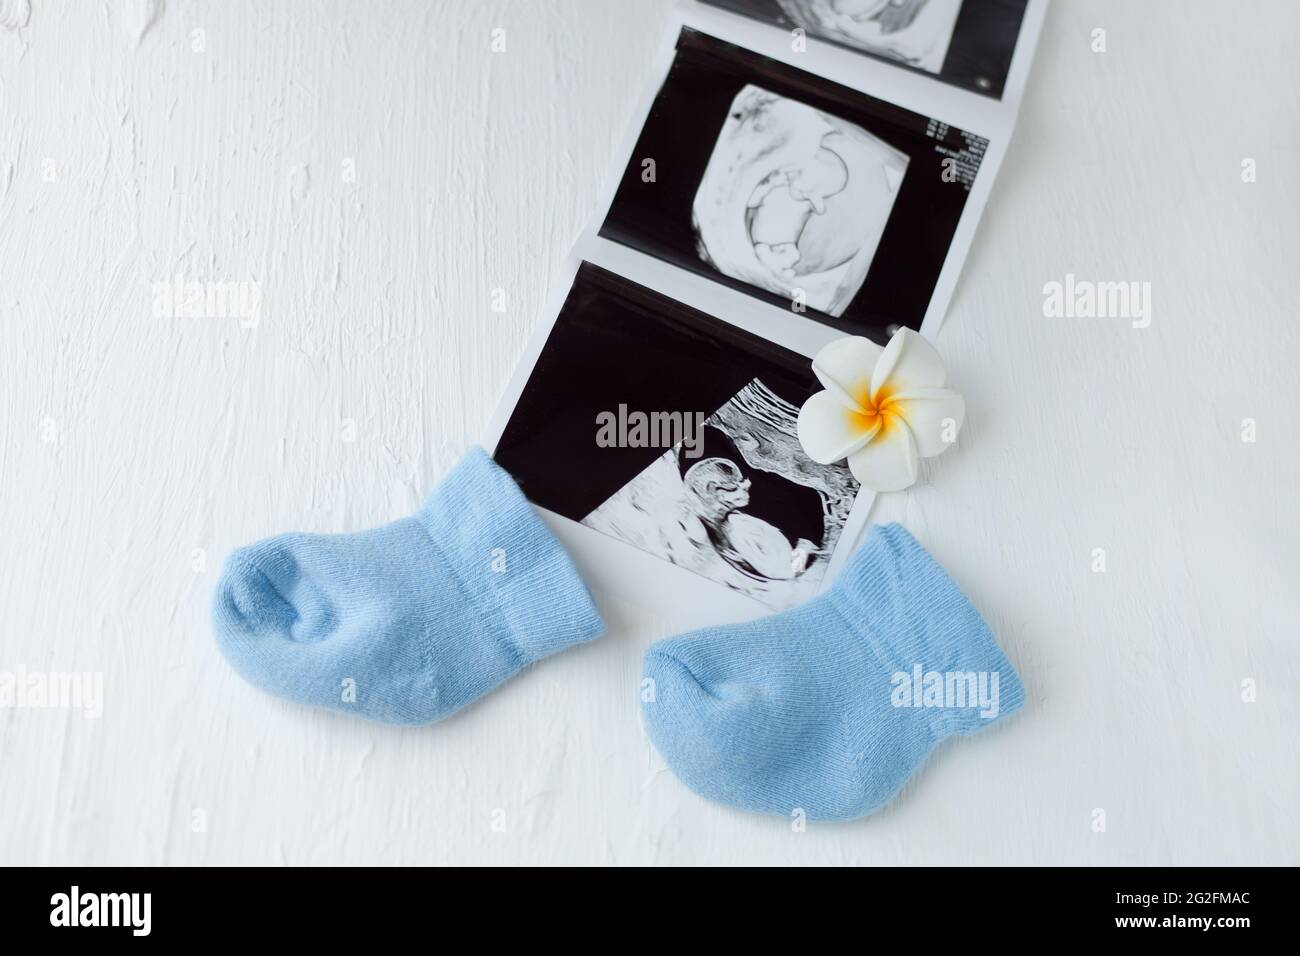 Child health. Baby boy blue socks with ultrasound tests images - pregnancy care and maternity concept. Stock Photo